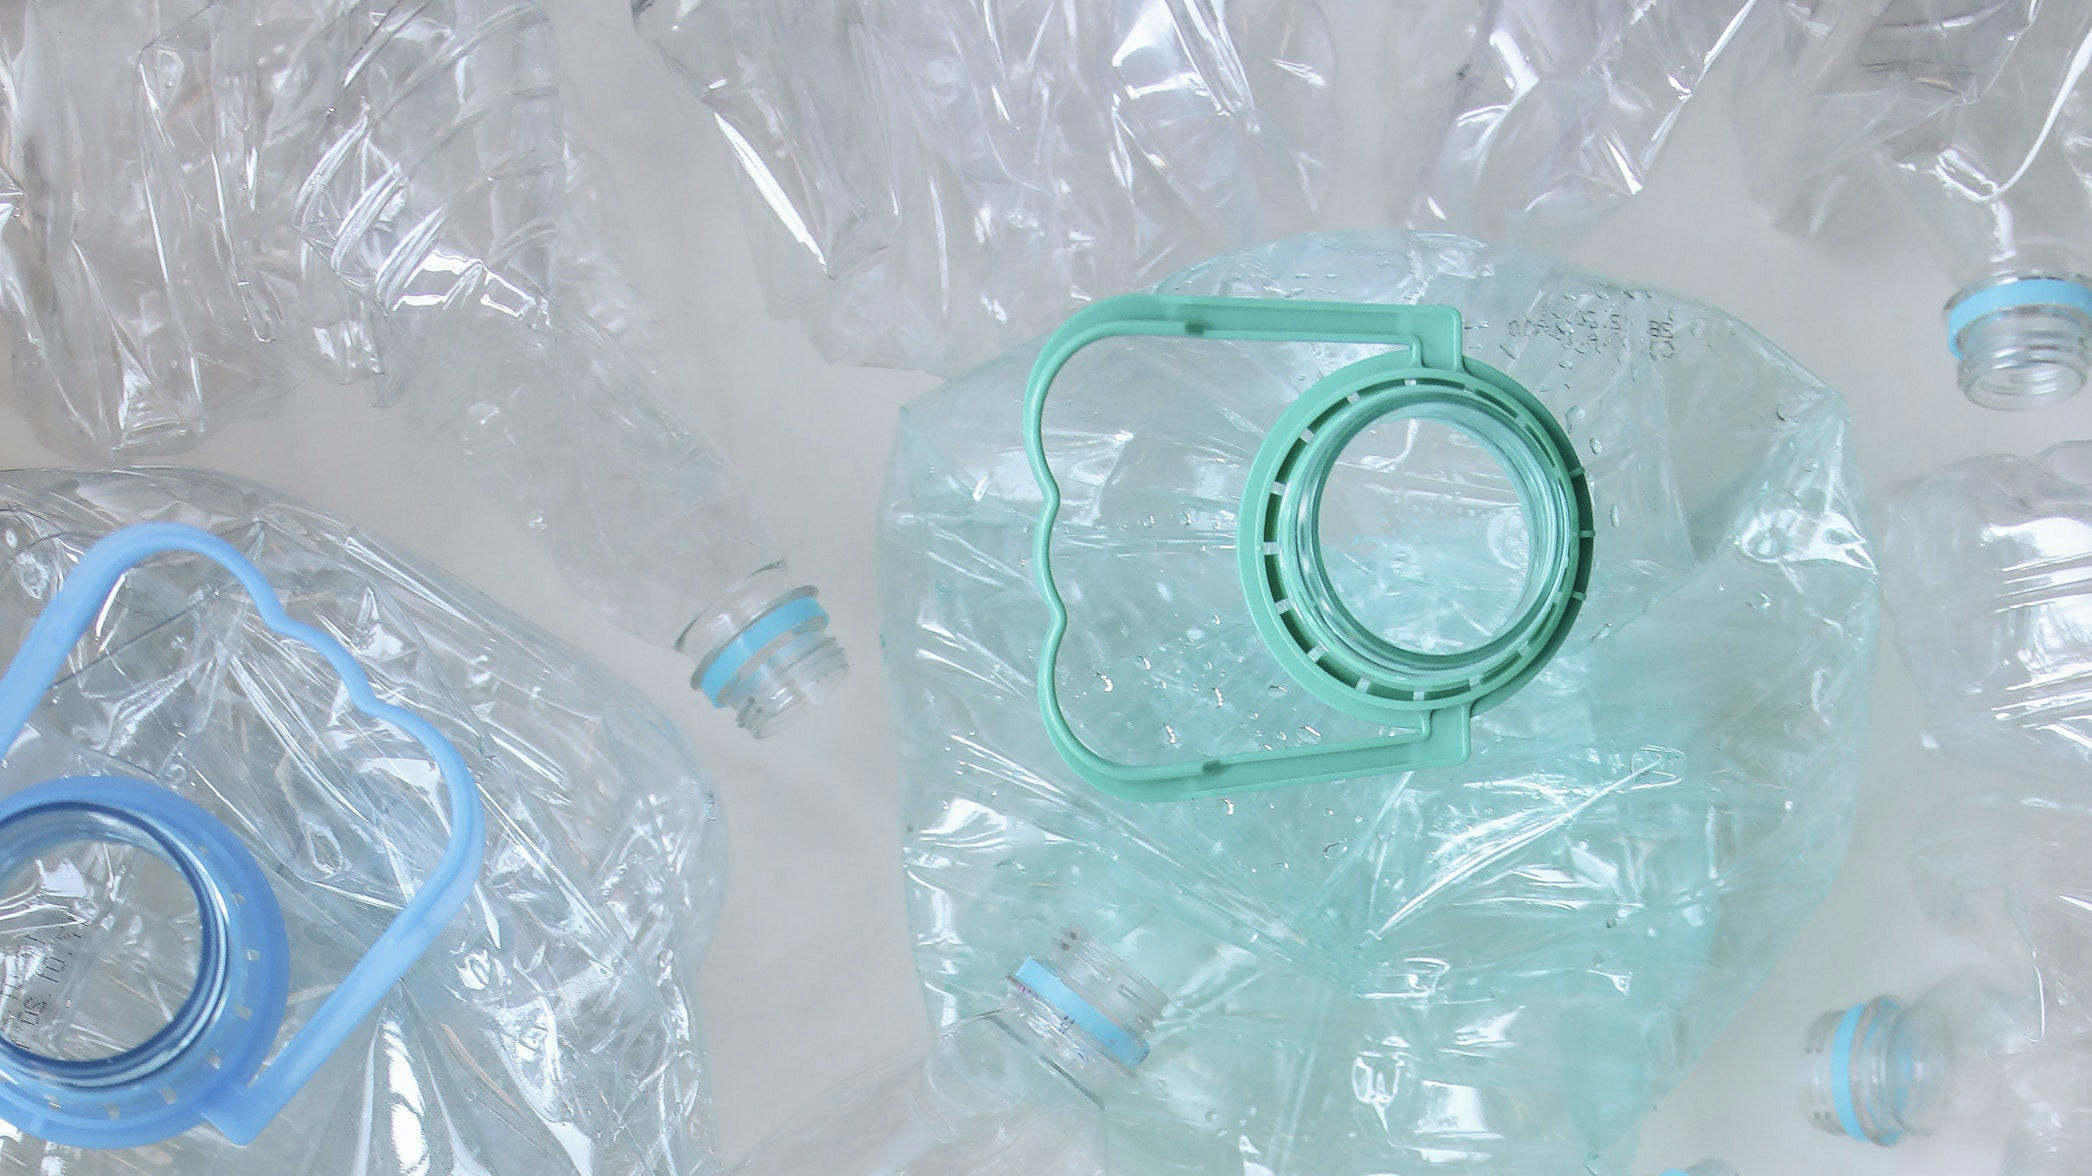 Learning how to make a plastic-free world with Unplastify